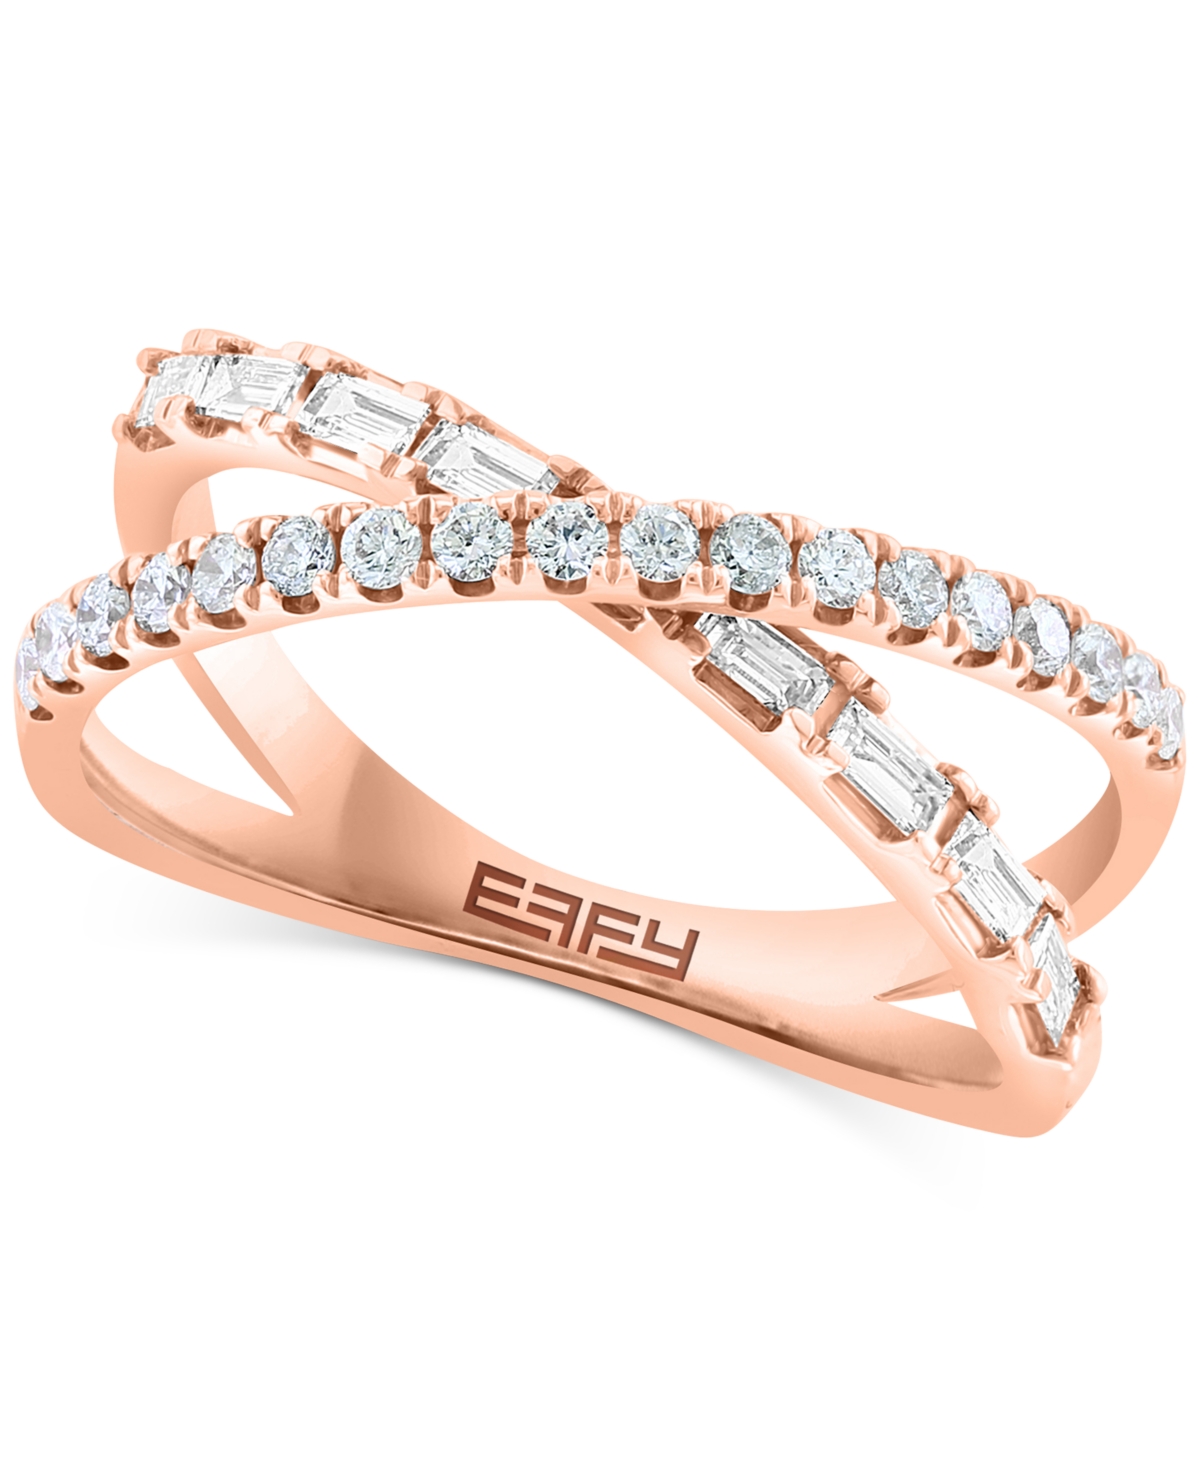 Effy Diamond Round & Baguette Crossover Ring (3/8 ct. t.w.) in 14k Rose Gold - Rose Gold